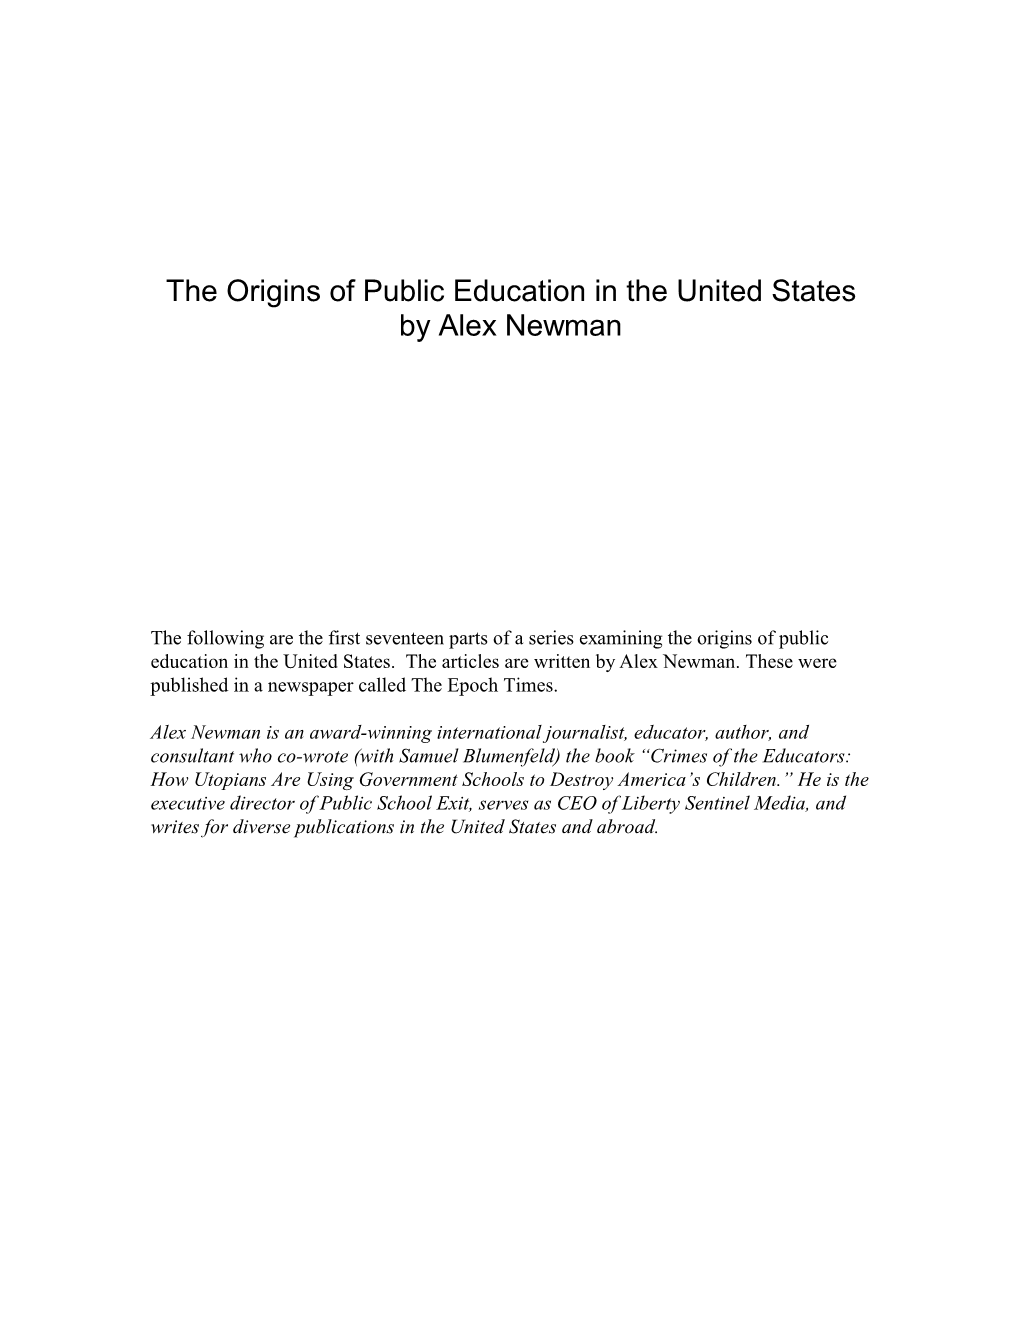 The Origins of Public Education in the United States by Alex Newman